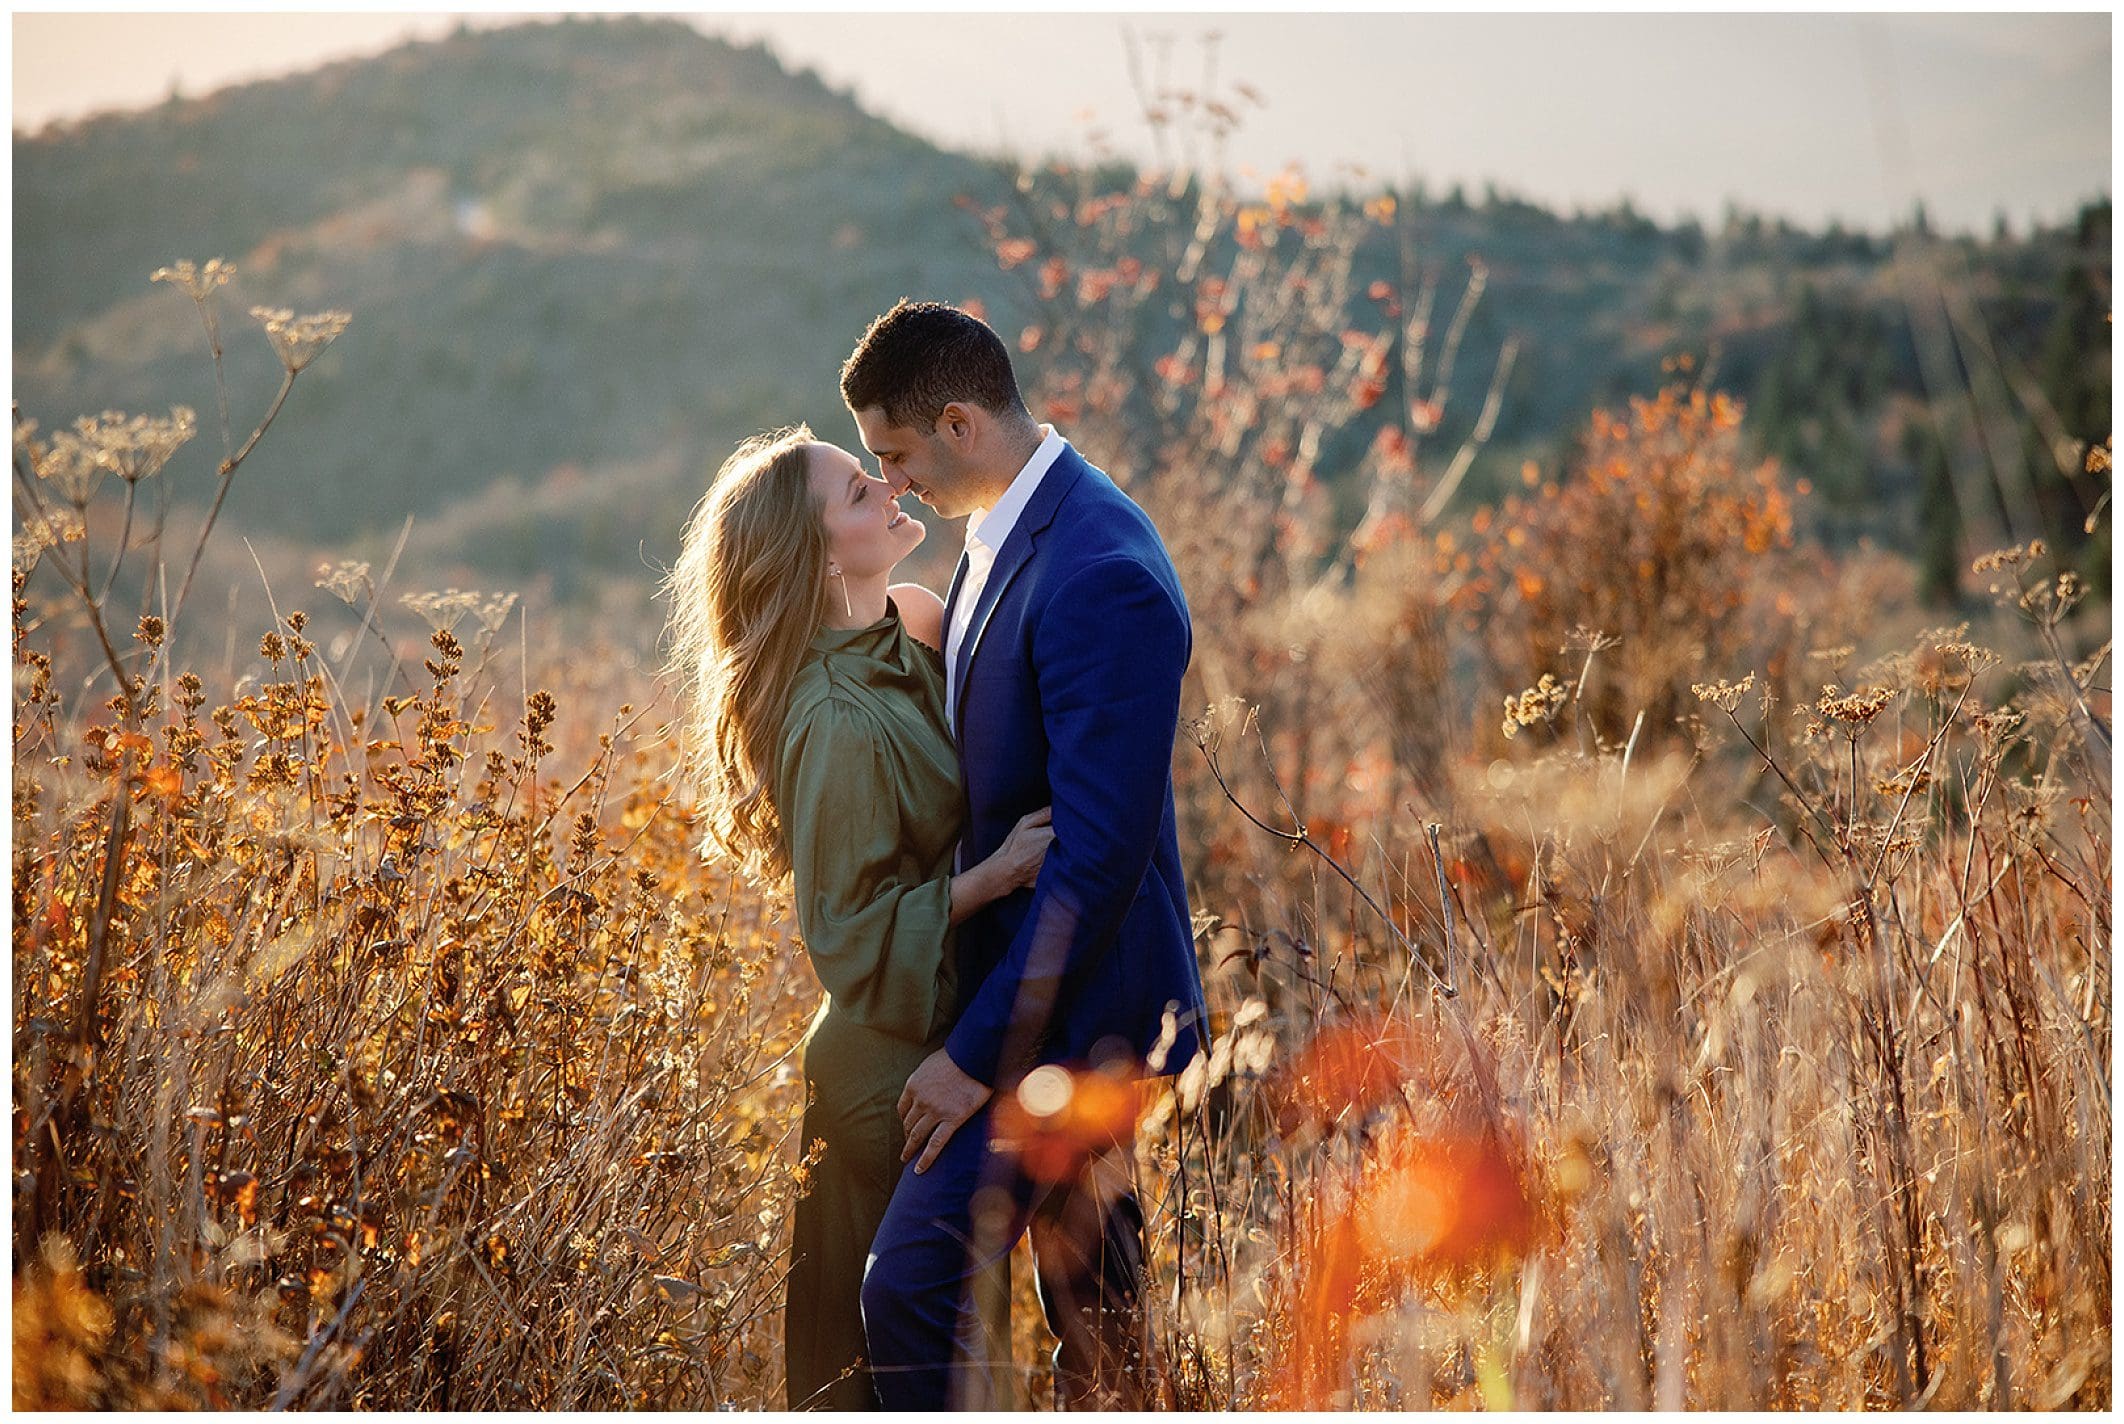 A man in a blue suit and a woman in a green shirt embrace in a sunlit field, celebrating their sunrise engagement.